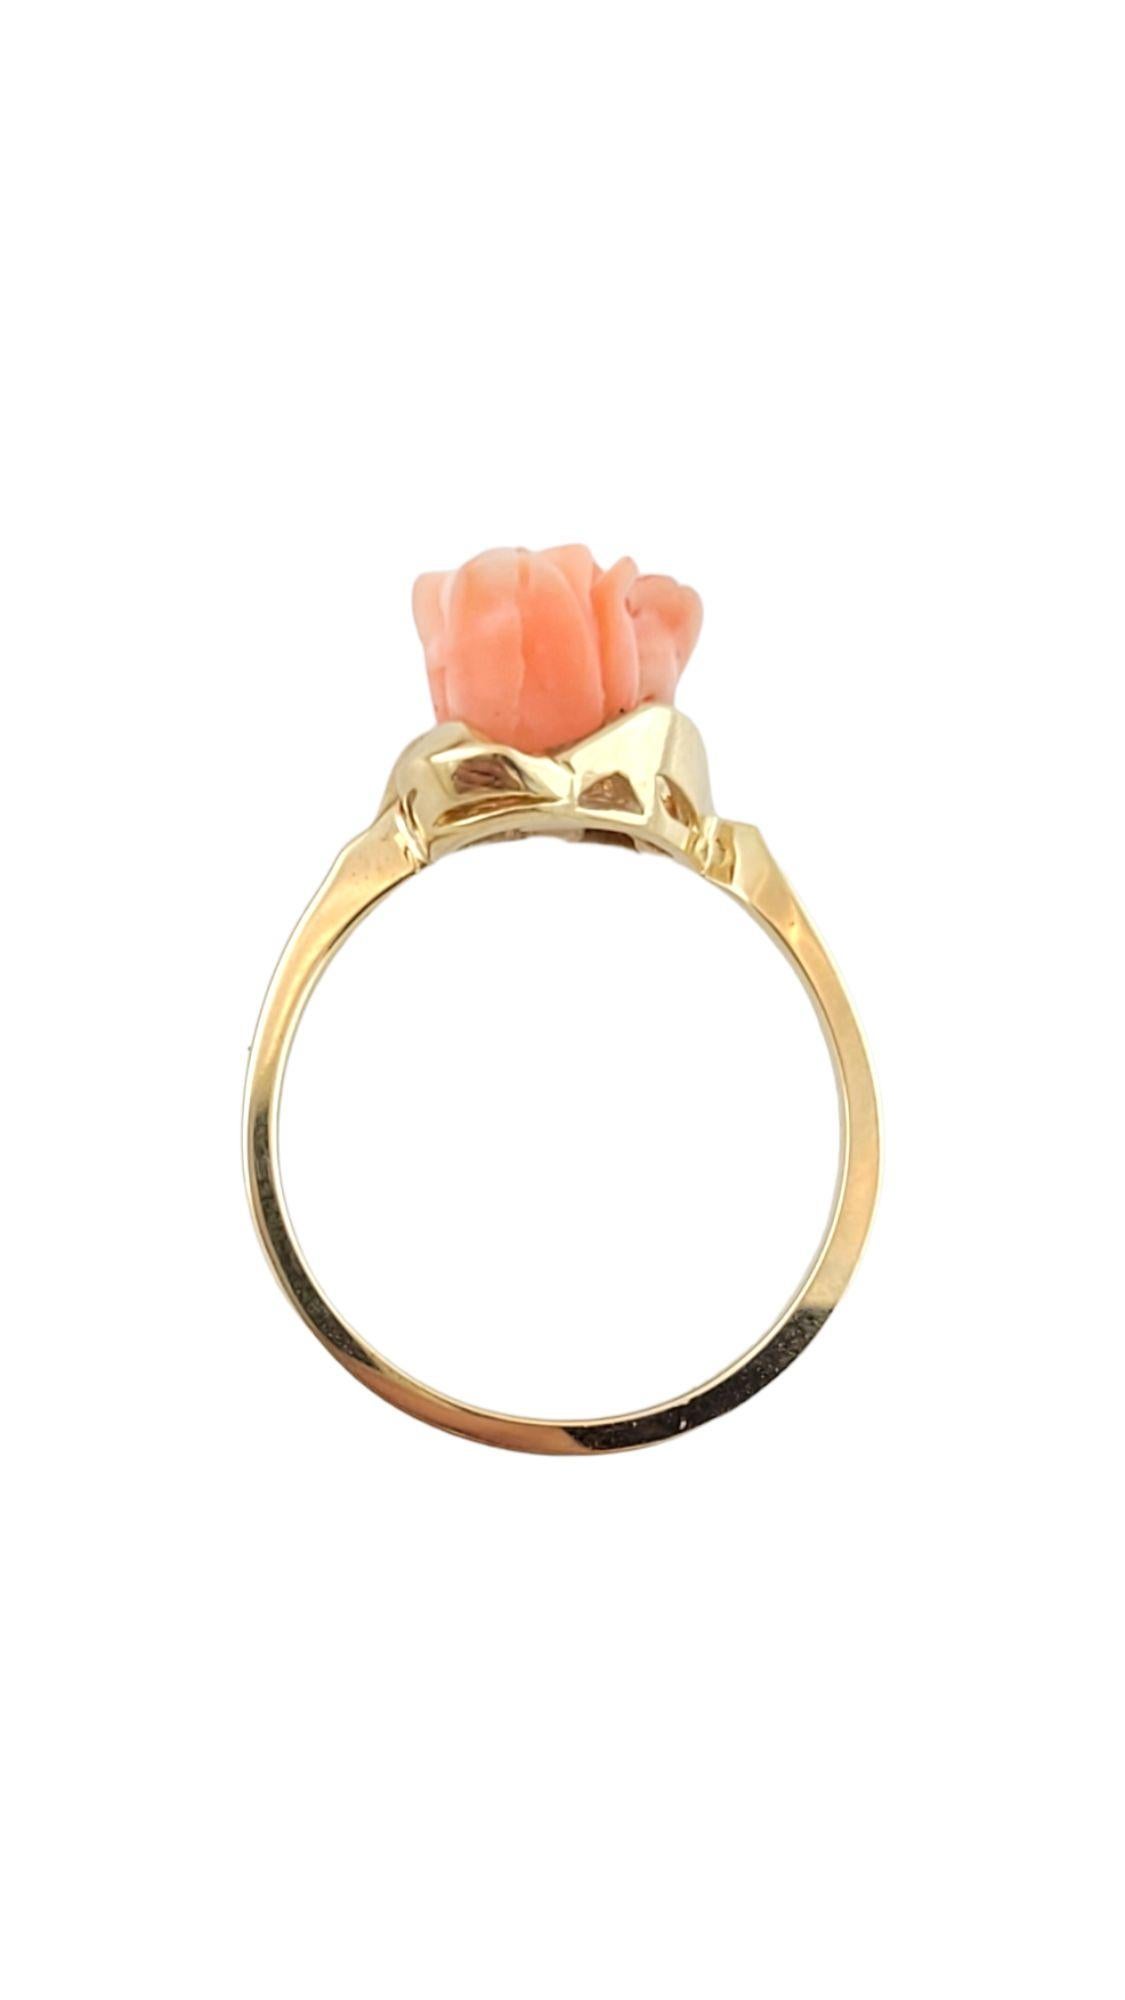 10K Yellow Gold Coral Rose Ring Size 6.5 #14611 In Good Condition For Sale In Washington Depot, CT